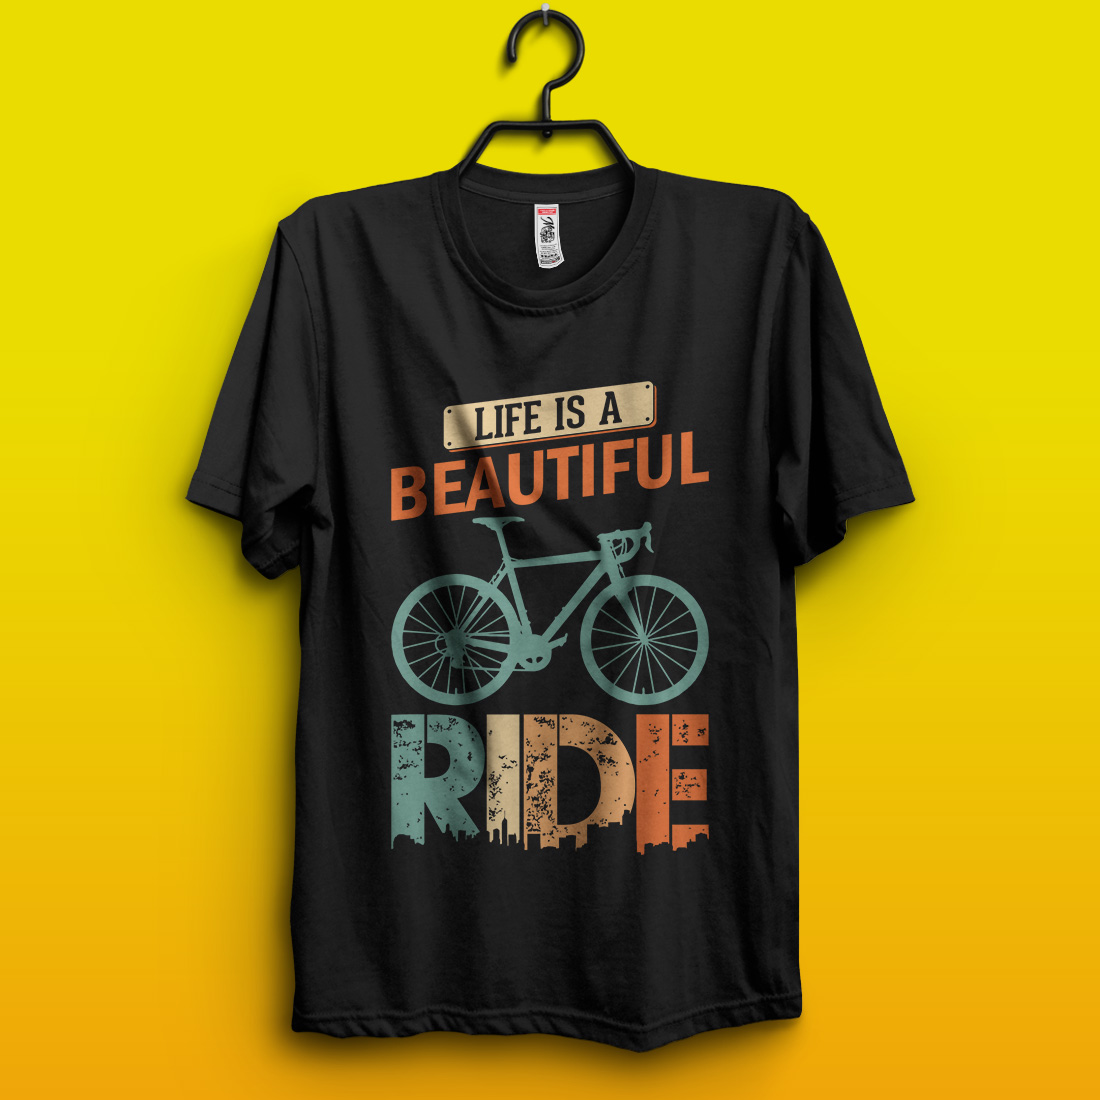 Life is a beautiful ride – Cycling quotes t-shirt design for adventure lovers pinterest preview image.